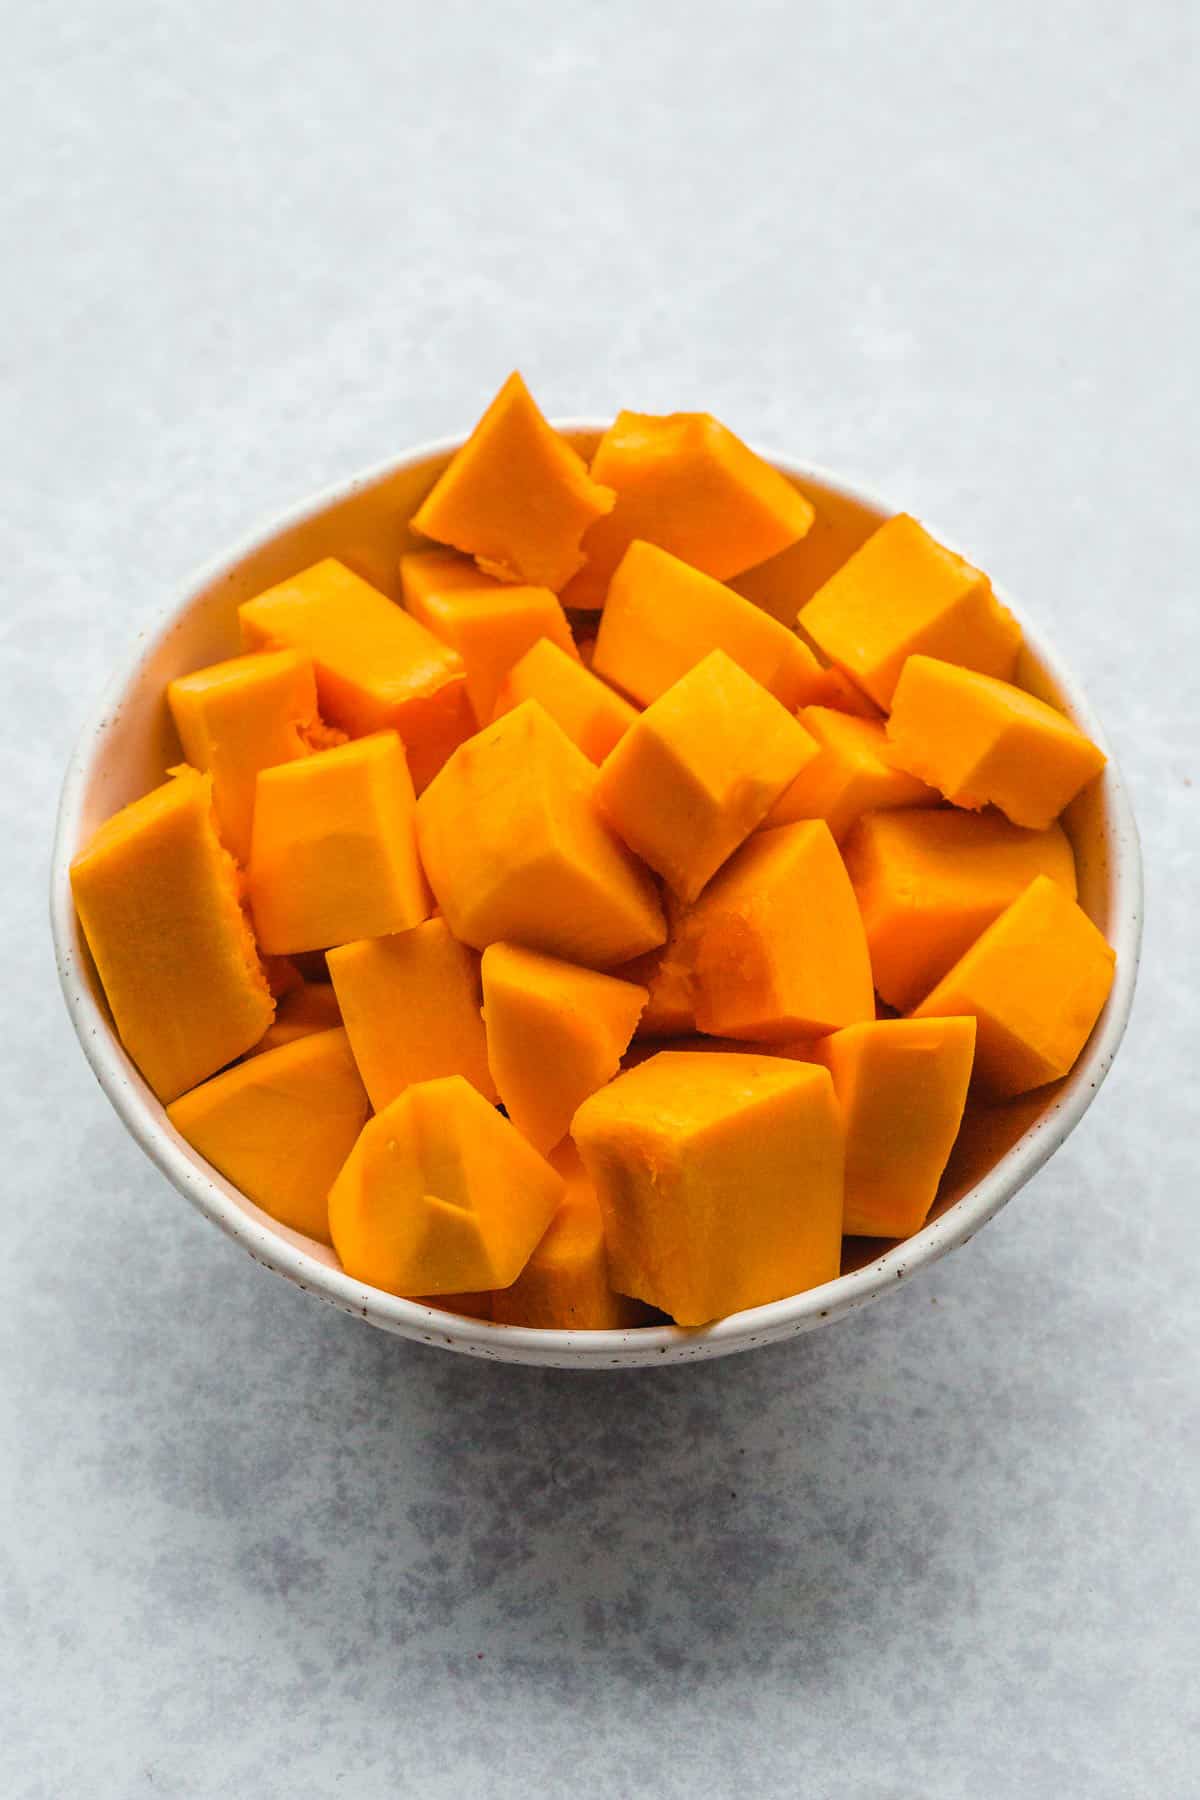 Pumpkin peeled and diced into cubes